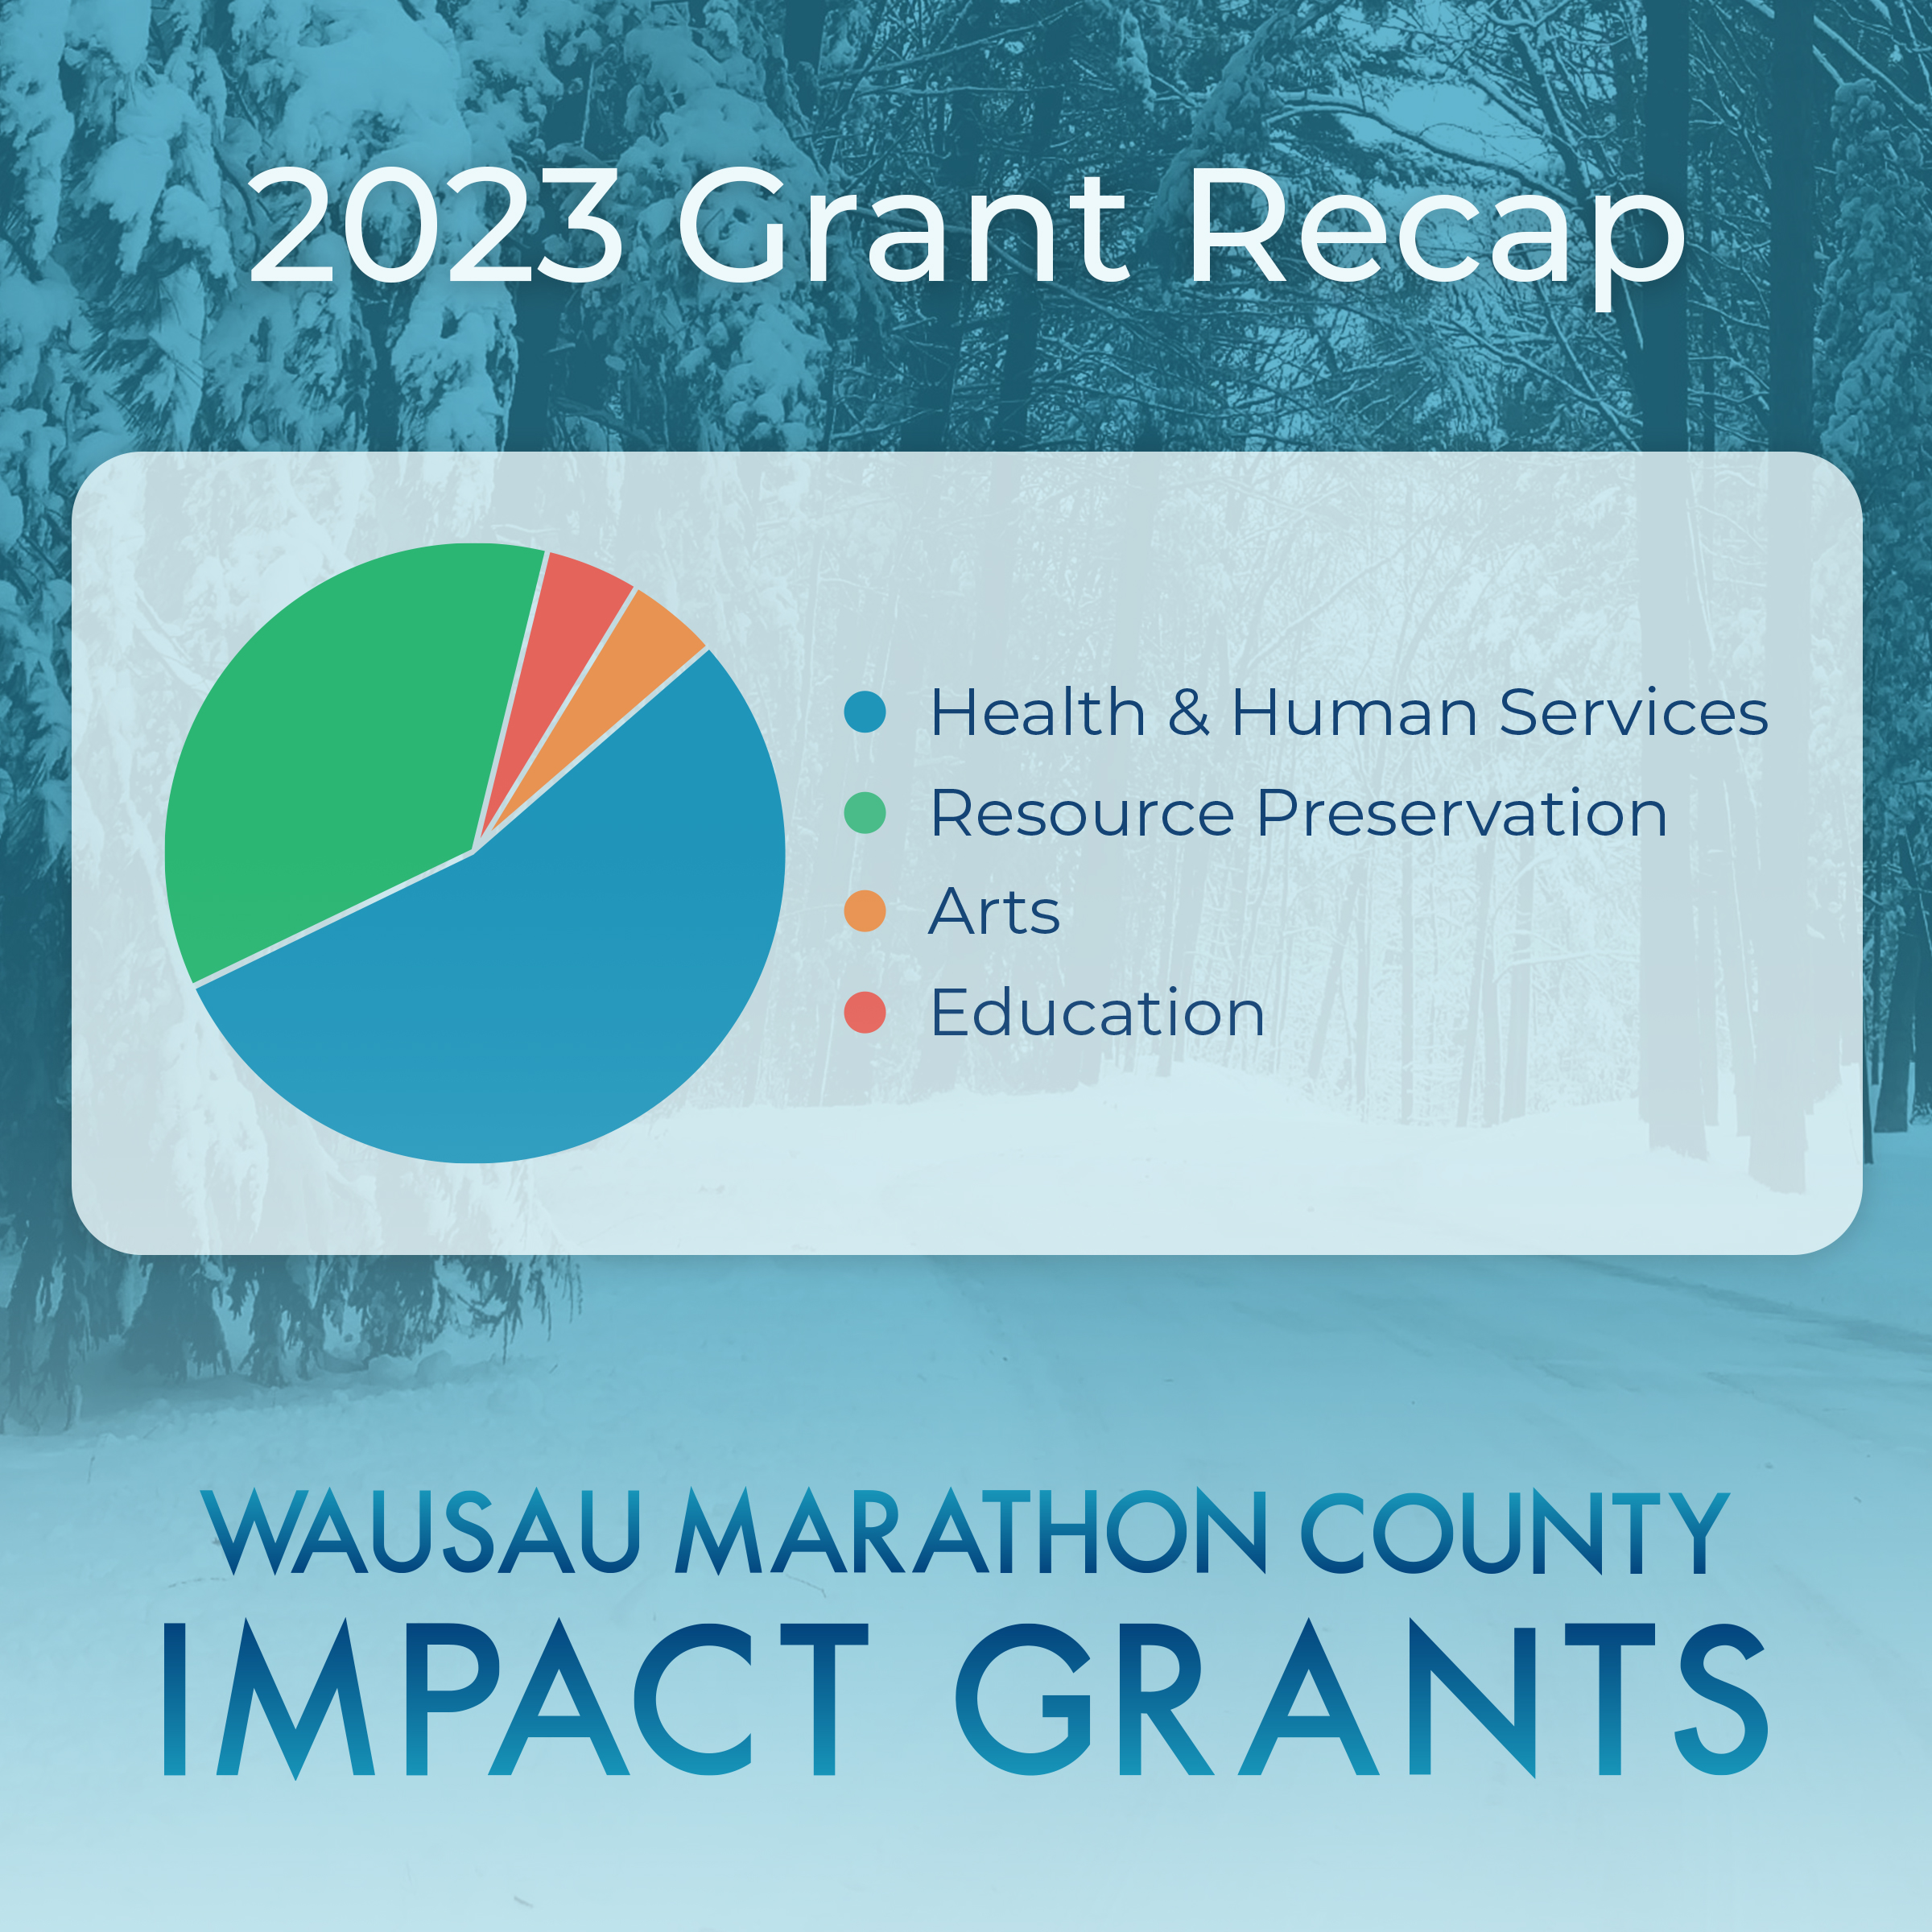 2023 Grant Recap graphic showing pie chart with slices for Health Human Services, Resource Preservation, Arts, and Education